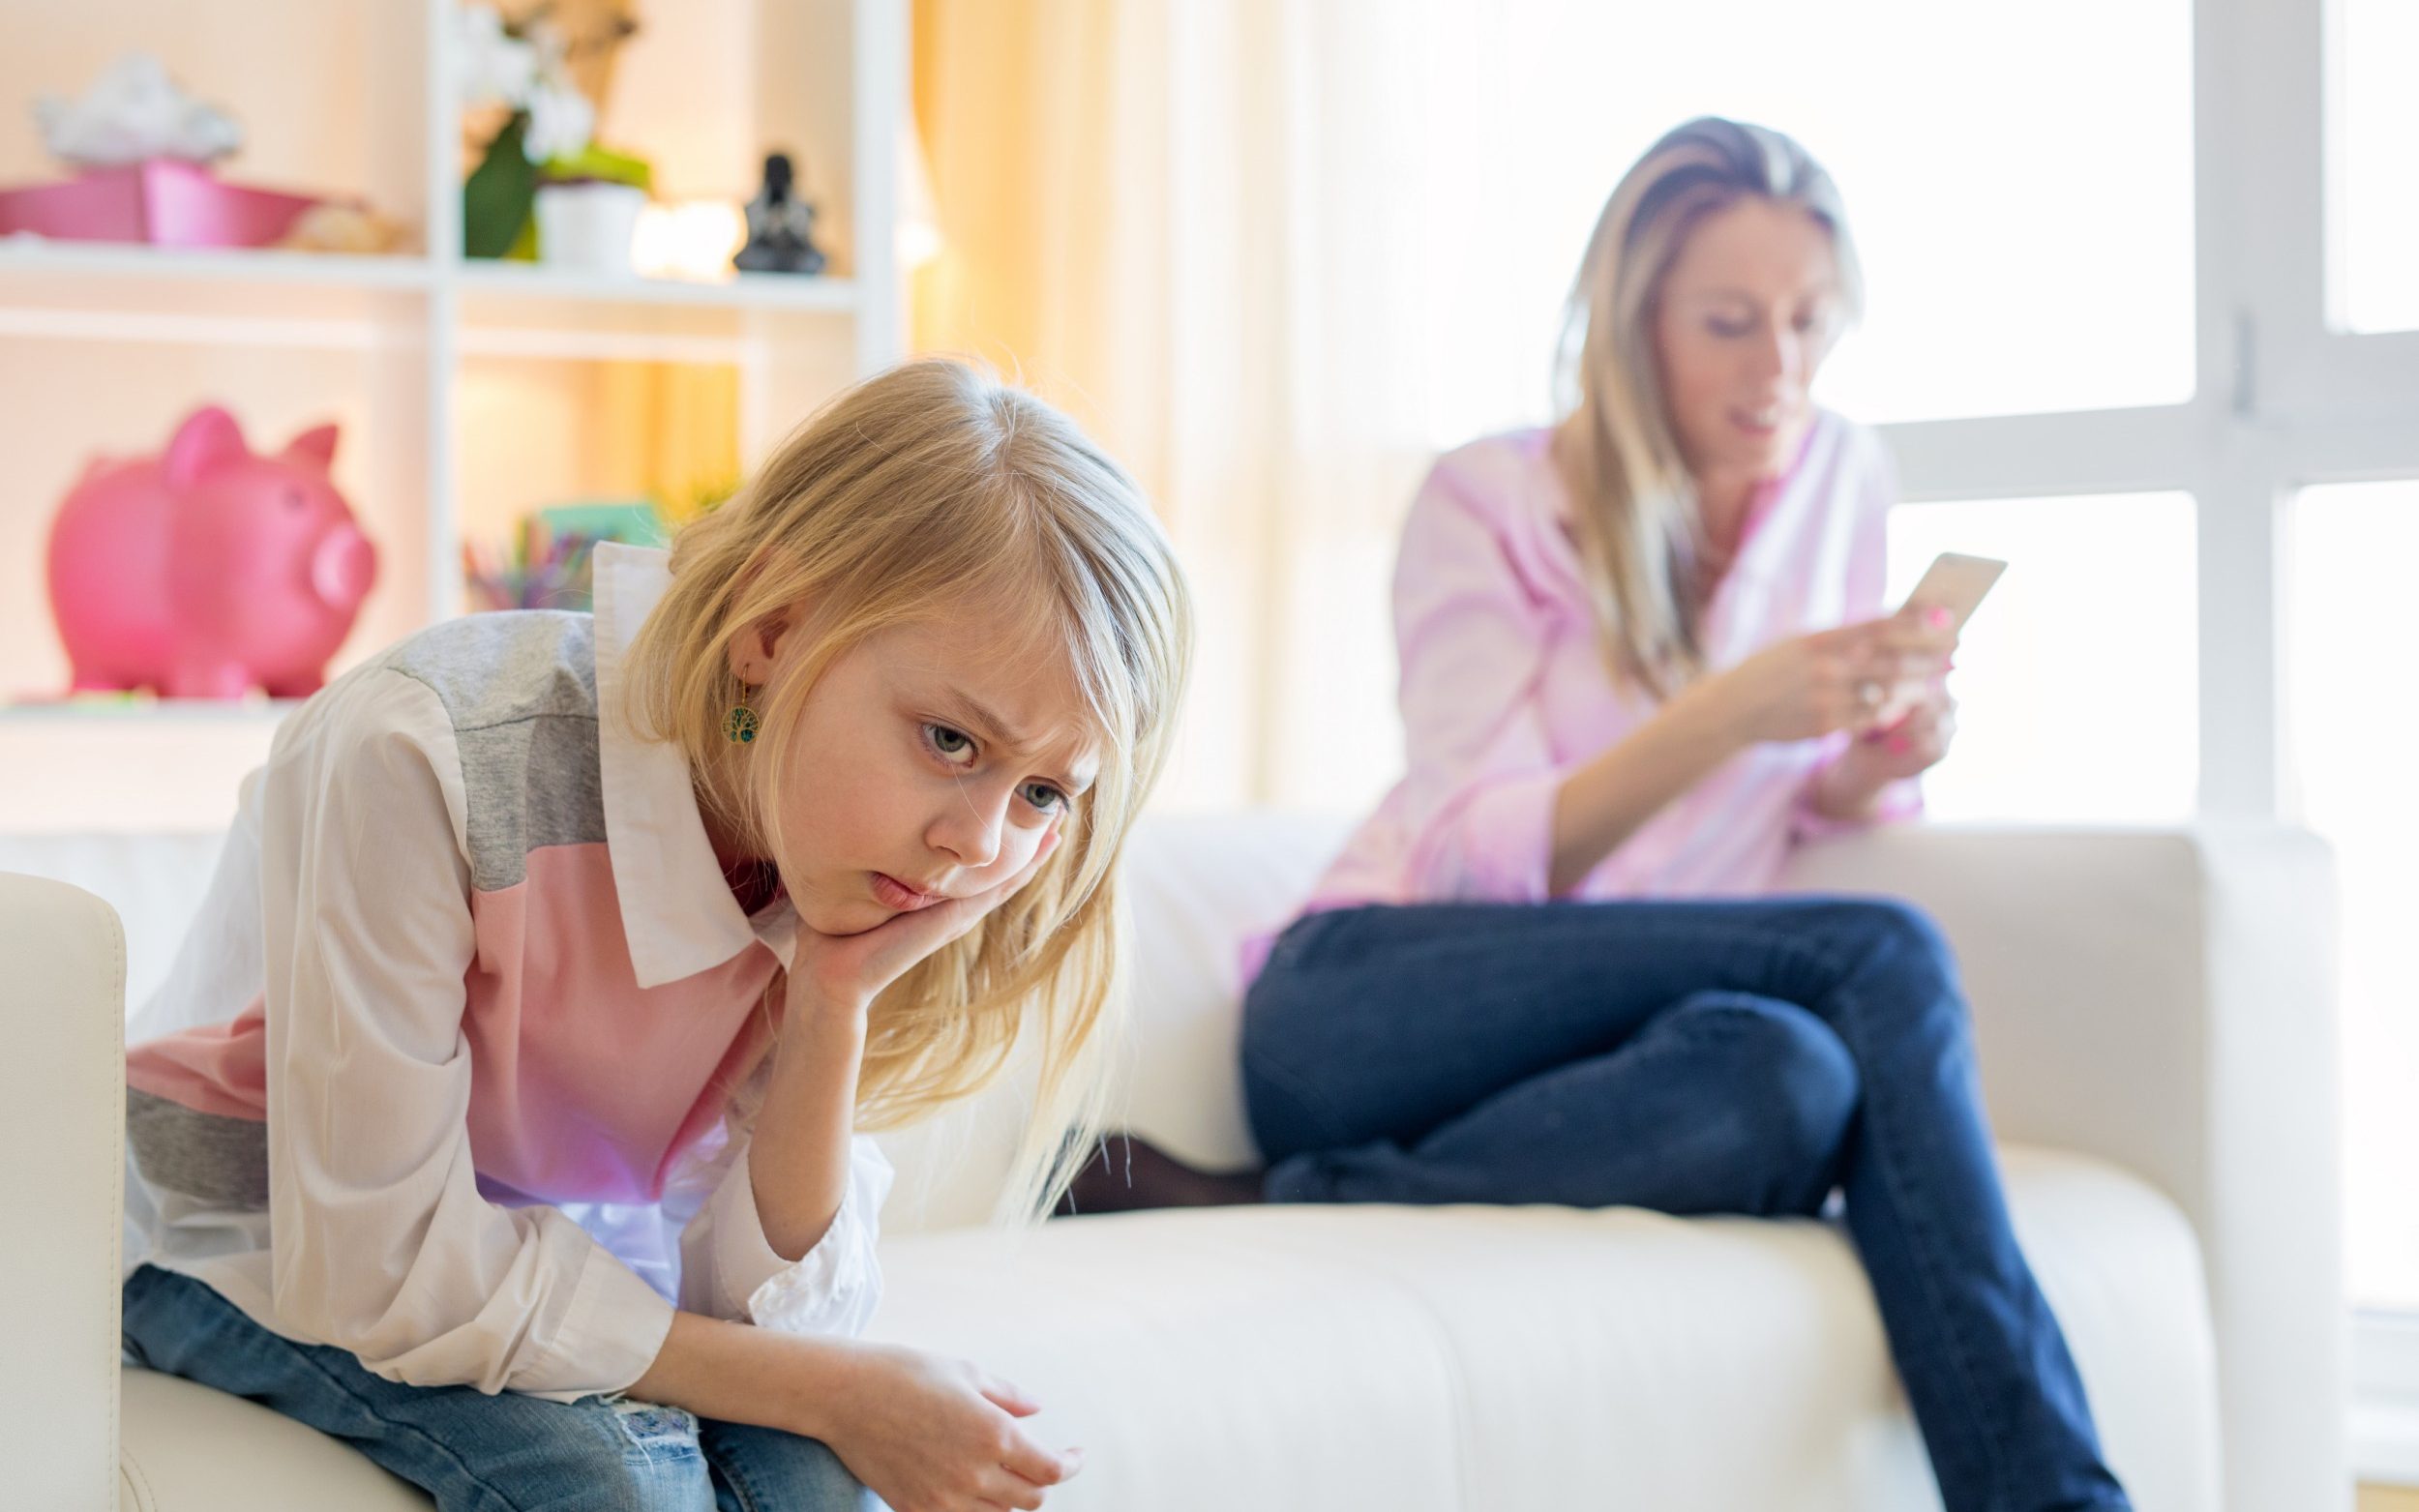 can we blame kids for wanting a phone when we’re so attached to ours?